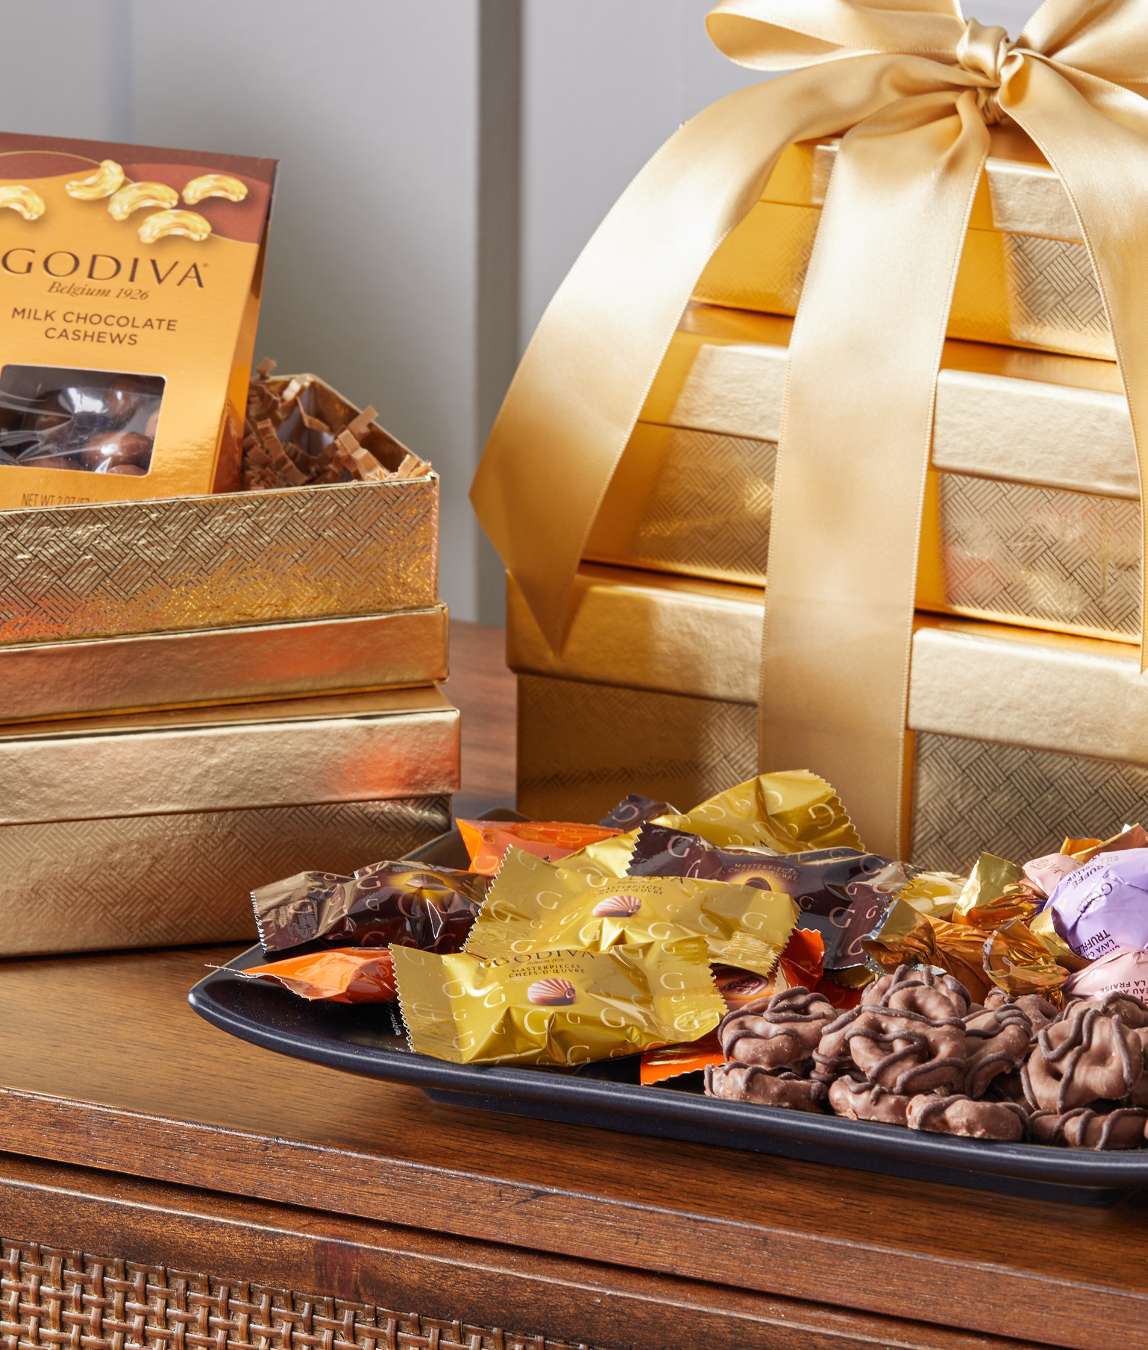 End Of Year Celebrations Corporate Gifts with Belgian Chocolate